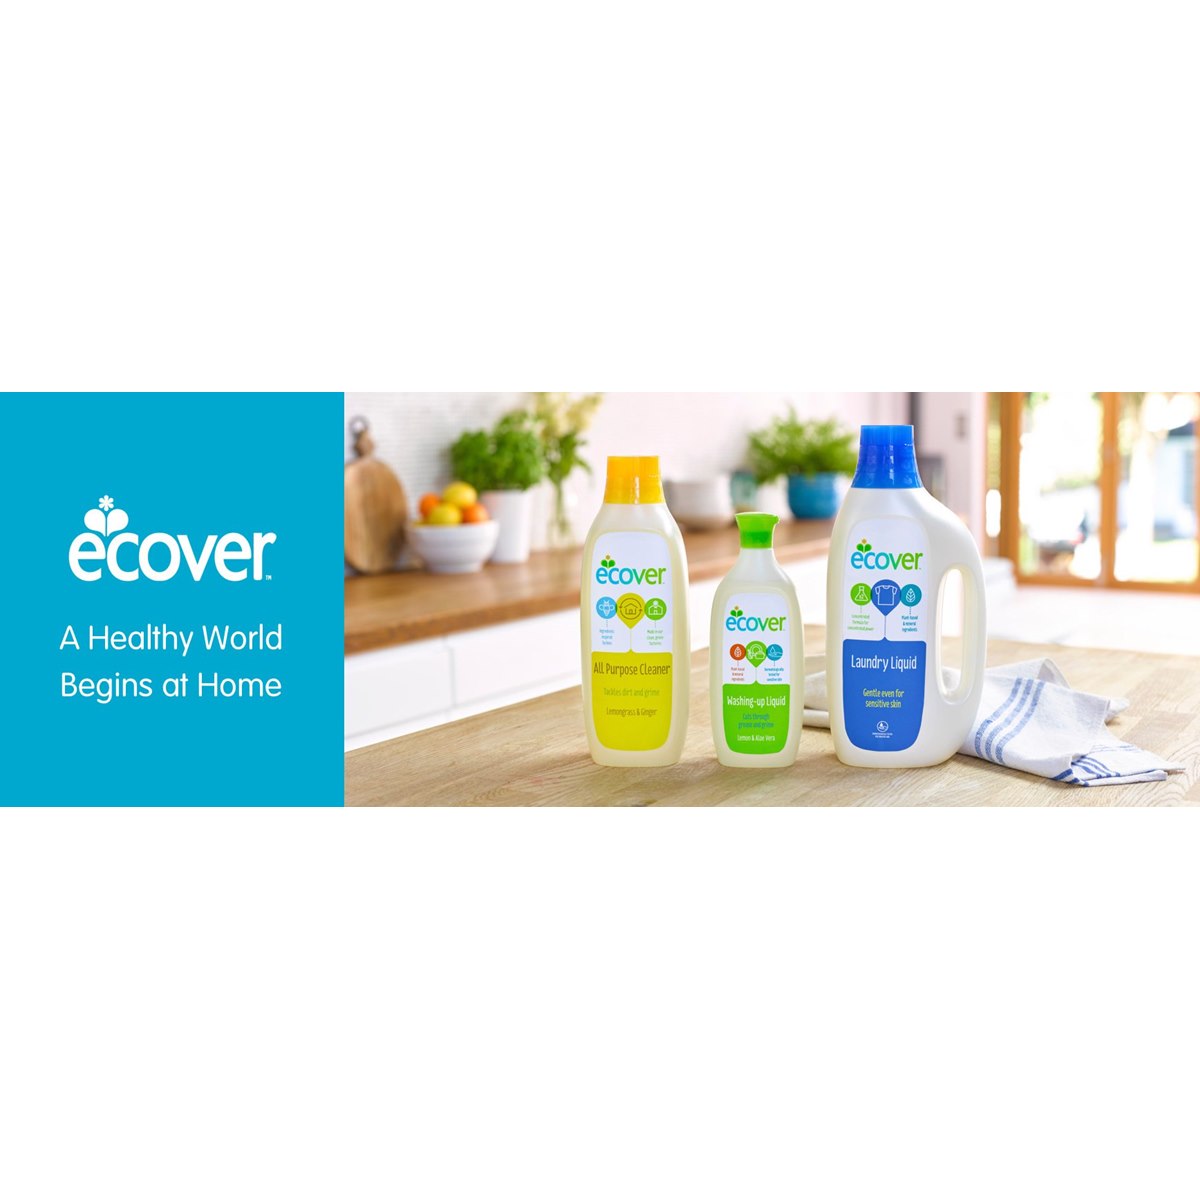 Where to Buy Ecover Products